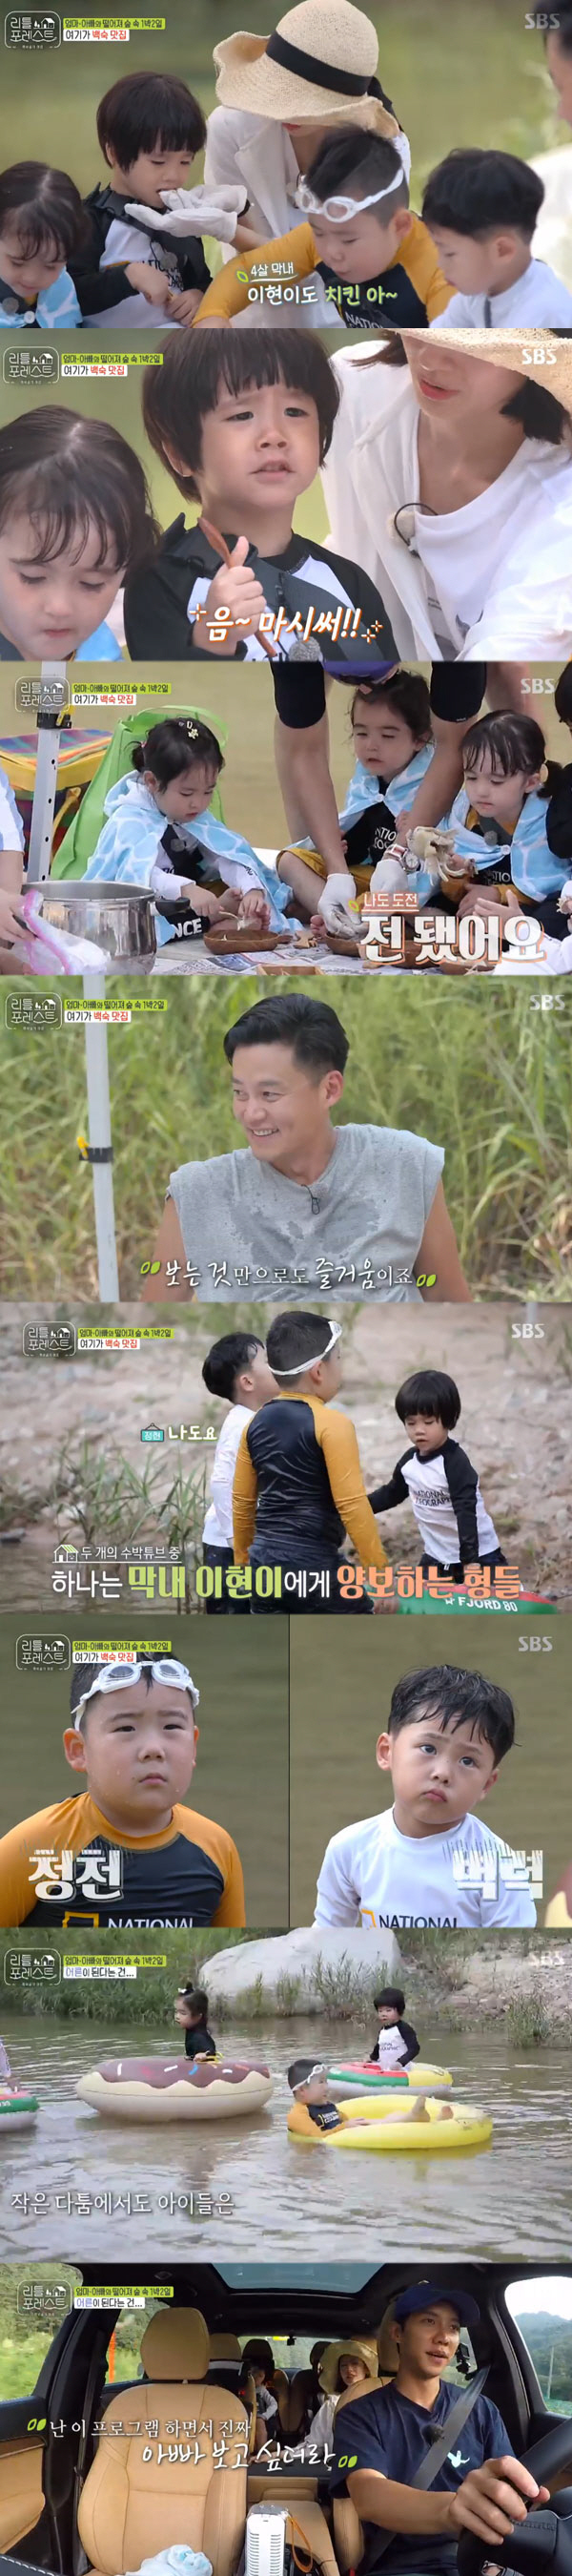 Little Forest Lee Seo-jin, Lee Seung-gi, Park Na-rae and Jung So-min had a good time with Little.On the 2nd broadcast SBS Little Forest: Summer of the Tick-Buckles (hereinafter referred to as Little Forest), the Valley water play scene of Lee Seo-jin, Lee Seung-gi, Park Na-rae, Jung So-min and Little Lee was released.Lee Seo-jin and Park Na-rae set out to prepare for the summer special Baeksuk for Little.Park Na-rae, who had previously revealed he had chicken phobias, told me about cooking tips instead of touching raw chickens.Lee Seo-jin transformed into a cooking bot Lee Seo-jin who was manipulated by action according to Park Na-raes instructions.Lee Seo-jin stepped out confidently to set fire to the fireplace where he would boil the cauldron white-cooked rice.Asked by Park Na-rae, Can you light up? Lee Seo-jin said, Its my specialty. Its not going to take 30 minutes.However, Lee Seo-jin, who struggled with sweating in unexpected heat waves and sweated in the first attempt, succeeded in the second attempt.Lee said, This is cooler than the win The Uncle, and Lee Seo-jin smiled proudly.At that time Lee Seo-jin is sweating and preparing for Baek Sook, Little Lee peels to steam corn directly from the garden.At this time, Lee Han was in agony for shaking again, and Lee Seung-gi said, If you pick it with corn, it is the first time in Korea.You can boast to the Friends that you have pulled your teeth with corn hair. However, Lee refused to draw this fear.In the end, he got into the car toward the water play without pulling his teeth. First, Lee Han started eating boiled corn.At the time of eating corn to avoid the shaking, Lee saw something, and soon cheered, I ate corn and fell out.Lee Seung-gi and Lee Seo-jin laughed greatly.Little people who arrived at Valley were surprised by the preparations themselves before entering the water.Other Littles had a good time in the water, while Eugeney felt fearful of the water; but he was encouraged by the appearance of other Friends and succeeded in getting himself into the water.At that time, Lee Seo-jin showed off his previous lung capacity by constantly blowing wind into the constant tube orders of Little.Especially Eugenei fell into the water trying to ride a frog tube, and Jung So-min reached out and held Eugenei. Eugene was surprised but did not cry briskly.Jung So-min said, It was embarrassing. I thought I should not panic. I told him it was okay.Thats important, he said, then realised.While enjoying the water play, Lee Seung-gi proposed the game, and Little people chose the team directly, and the popular vote of the members naturally proceeded.Lee Han-yi picked Park Na-rae, Kim Jin-hee picked Lee Seung-gi, Brooke and Grace, and Eugene picked Jung So-min.At that time, Lee said, I will do with the winner The Uncle, and Park Na-rae was embarrassed.Jung So-min said, I am so happy, but I am sorry for my sisters.After a full-scale water play, lunchtime. Little boys showed off storm chicken food as if they were hungry for water play.Its the prettiest time to eat well from a food standpoint - just seeing is a pleasure, Lee Seo-jin said.After finishing the meal, Lee Han-i and Kim Jin-hee left the watermelon tube, and Lee Seung-gi said, Do not do both.If you take one side, the other side is sick. At that time, Lee said, Ill give you and gave up the tube to my brother, and Lee Seung-gi praised it as this cool mix.On the way home, Littley fell asleep in the car.Lee Seung-gi said, I think my appearance is what I have seen from Father before. I wanted to see Father while making an e-Pro.